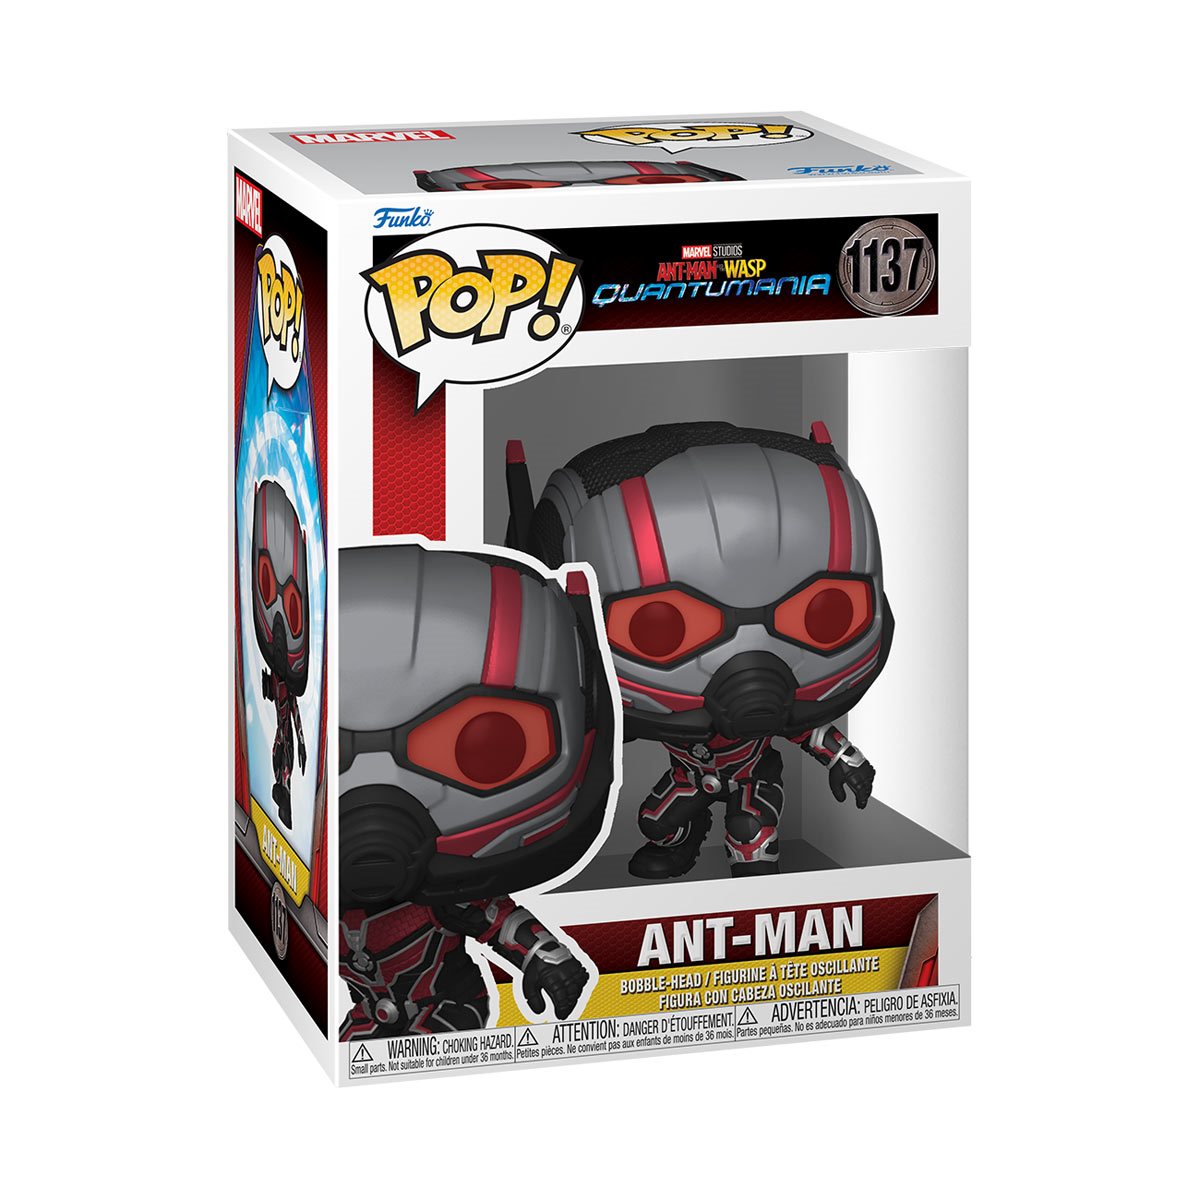 Ant-Man and the Wasp: Quantumania Ant-Man Funko Pop! Vinyl Figure